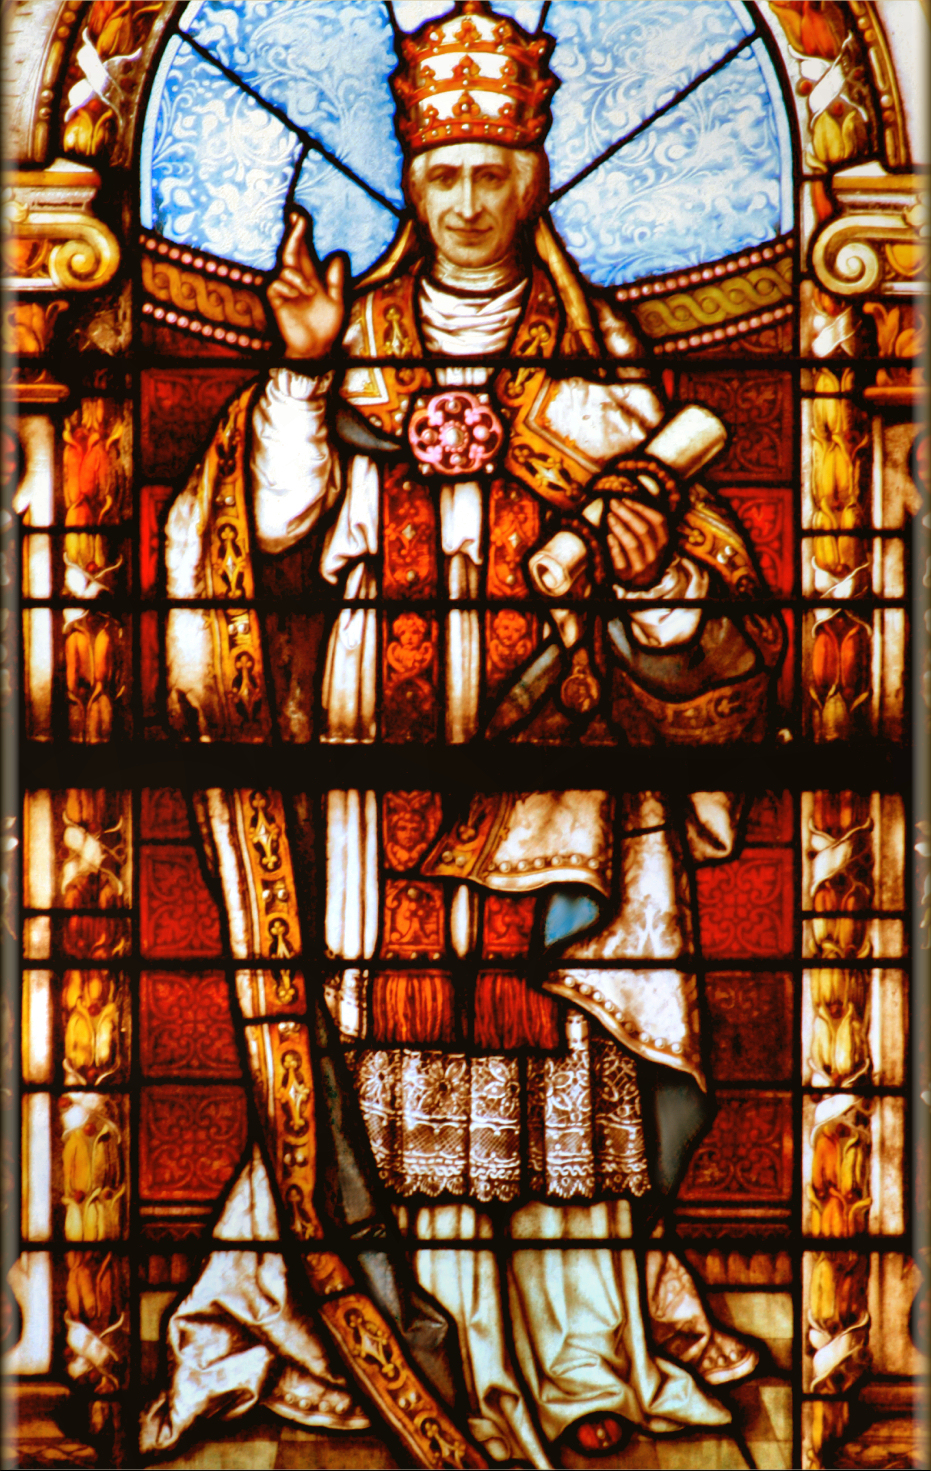 STAINED GLASS POPE LEO XIII